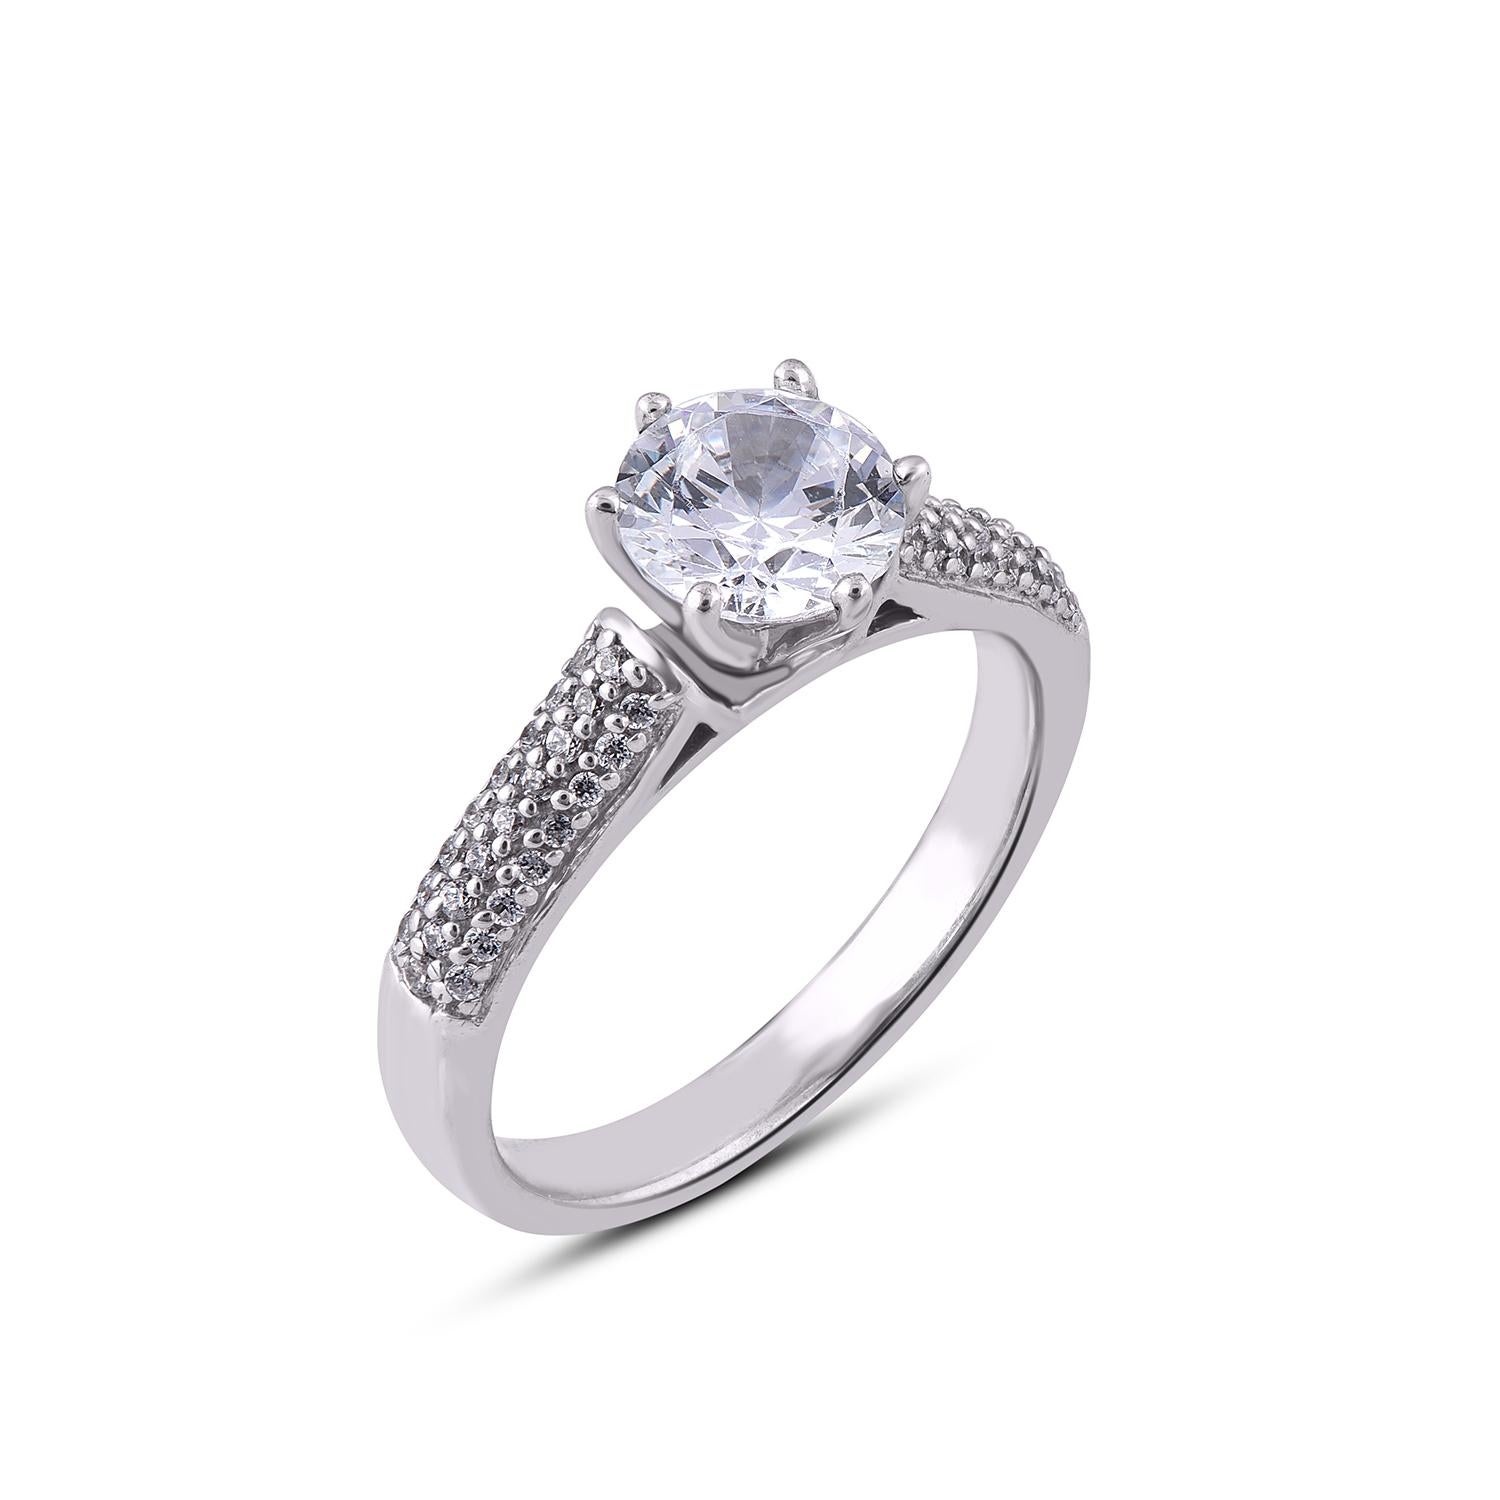 This Solitaire Engagement Ring is expertly crafted in 18 Karat white gold and features 1.00 ct centre stone and 0.25 ct diamond frame and shank lined with 50 diamond set in prong and pave setting. The diamonds are natural, not treated and dazzles in